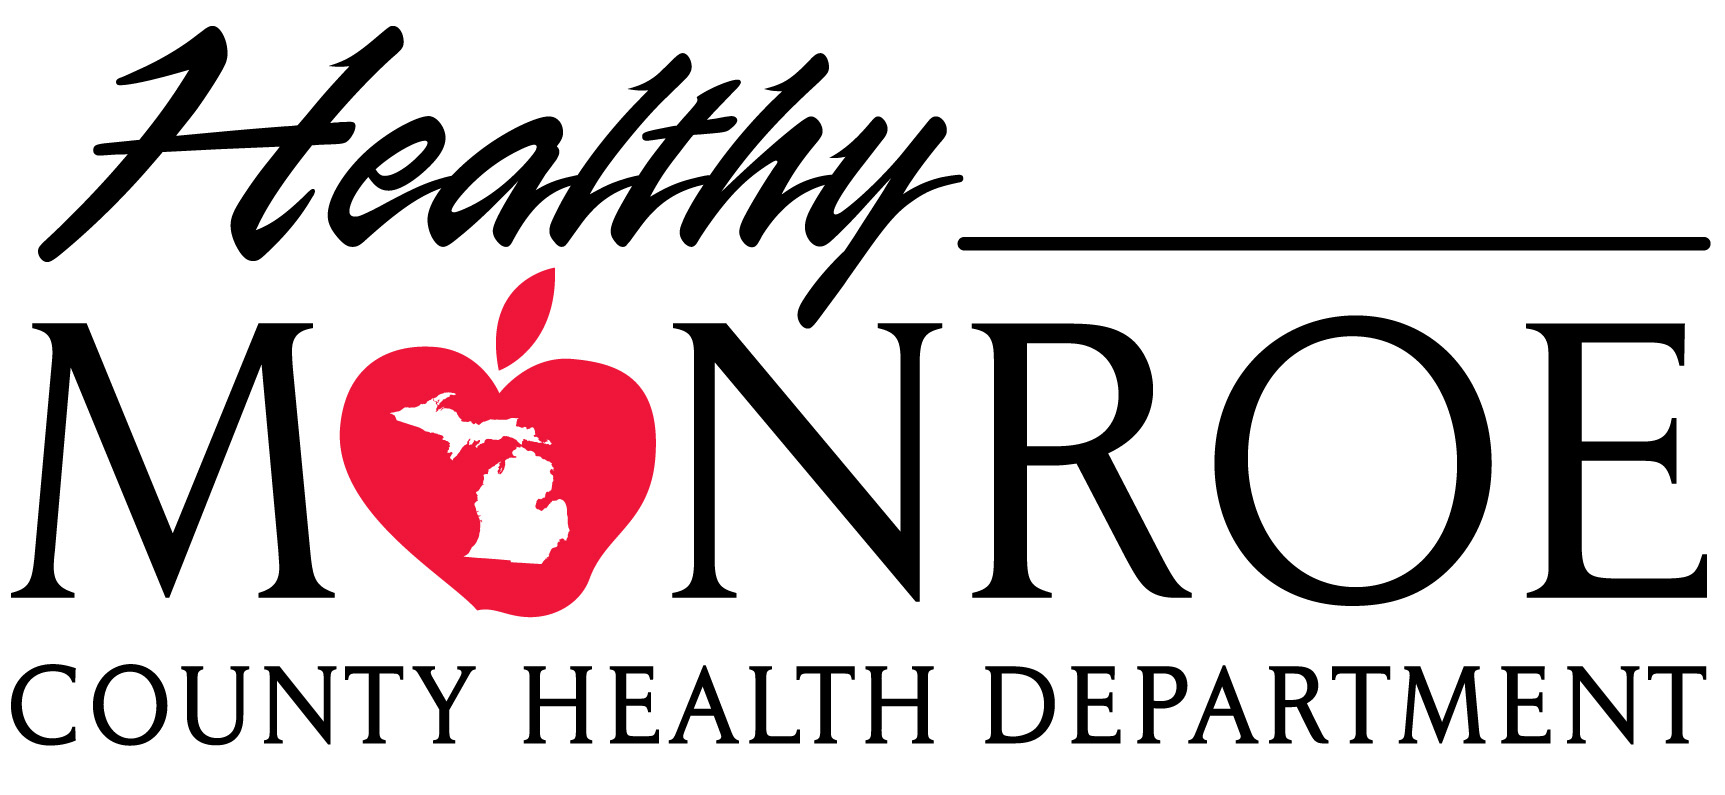 Healthy Monroe County Health Department logo. The words have a heart in the middle.